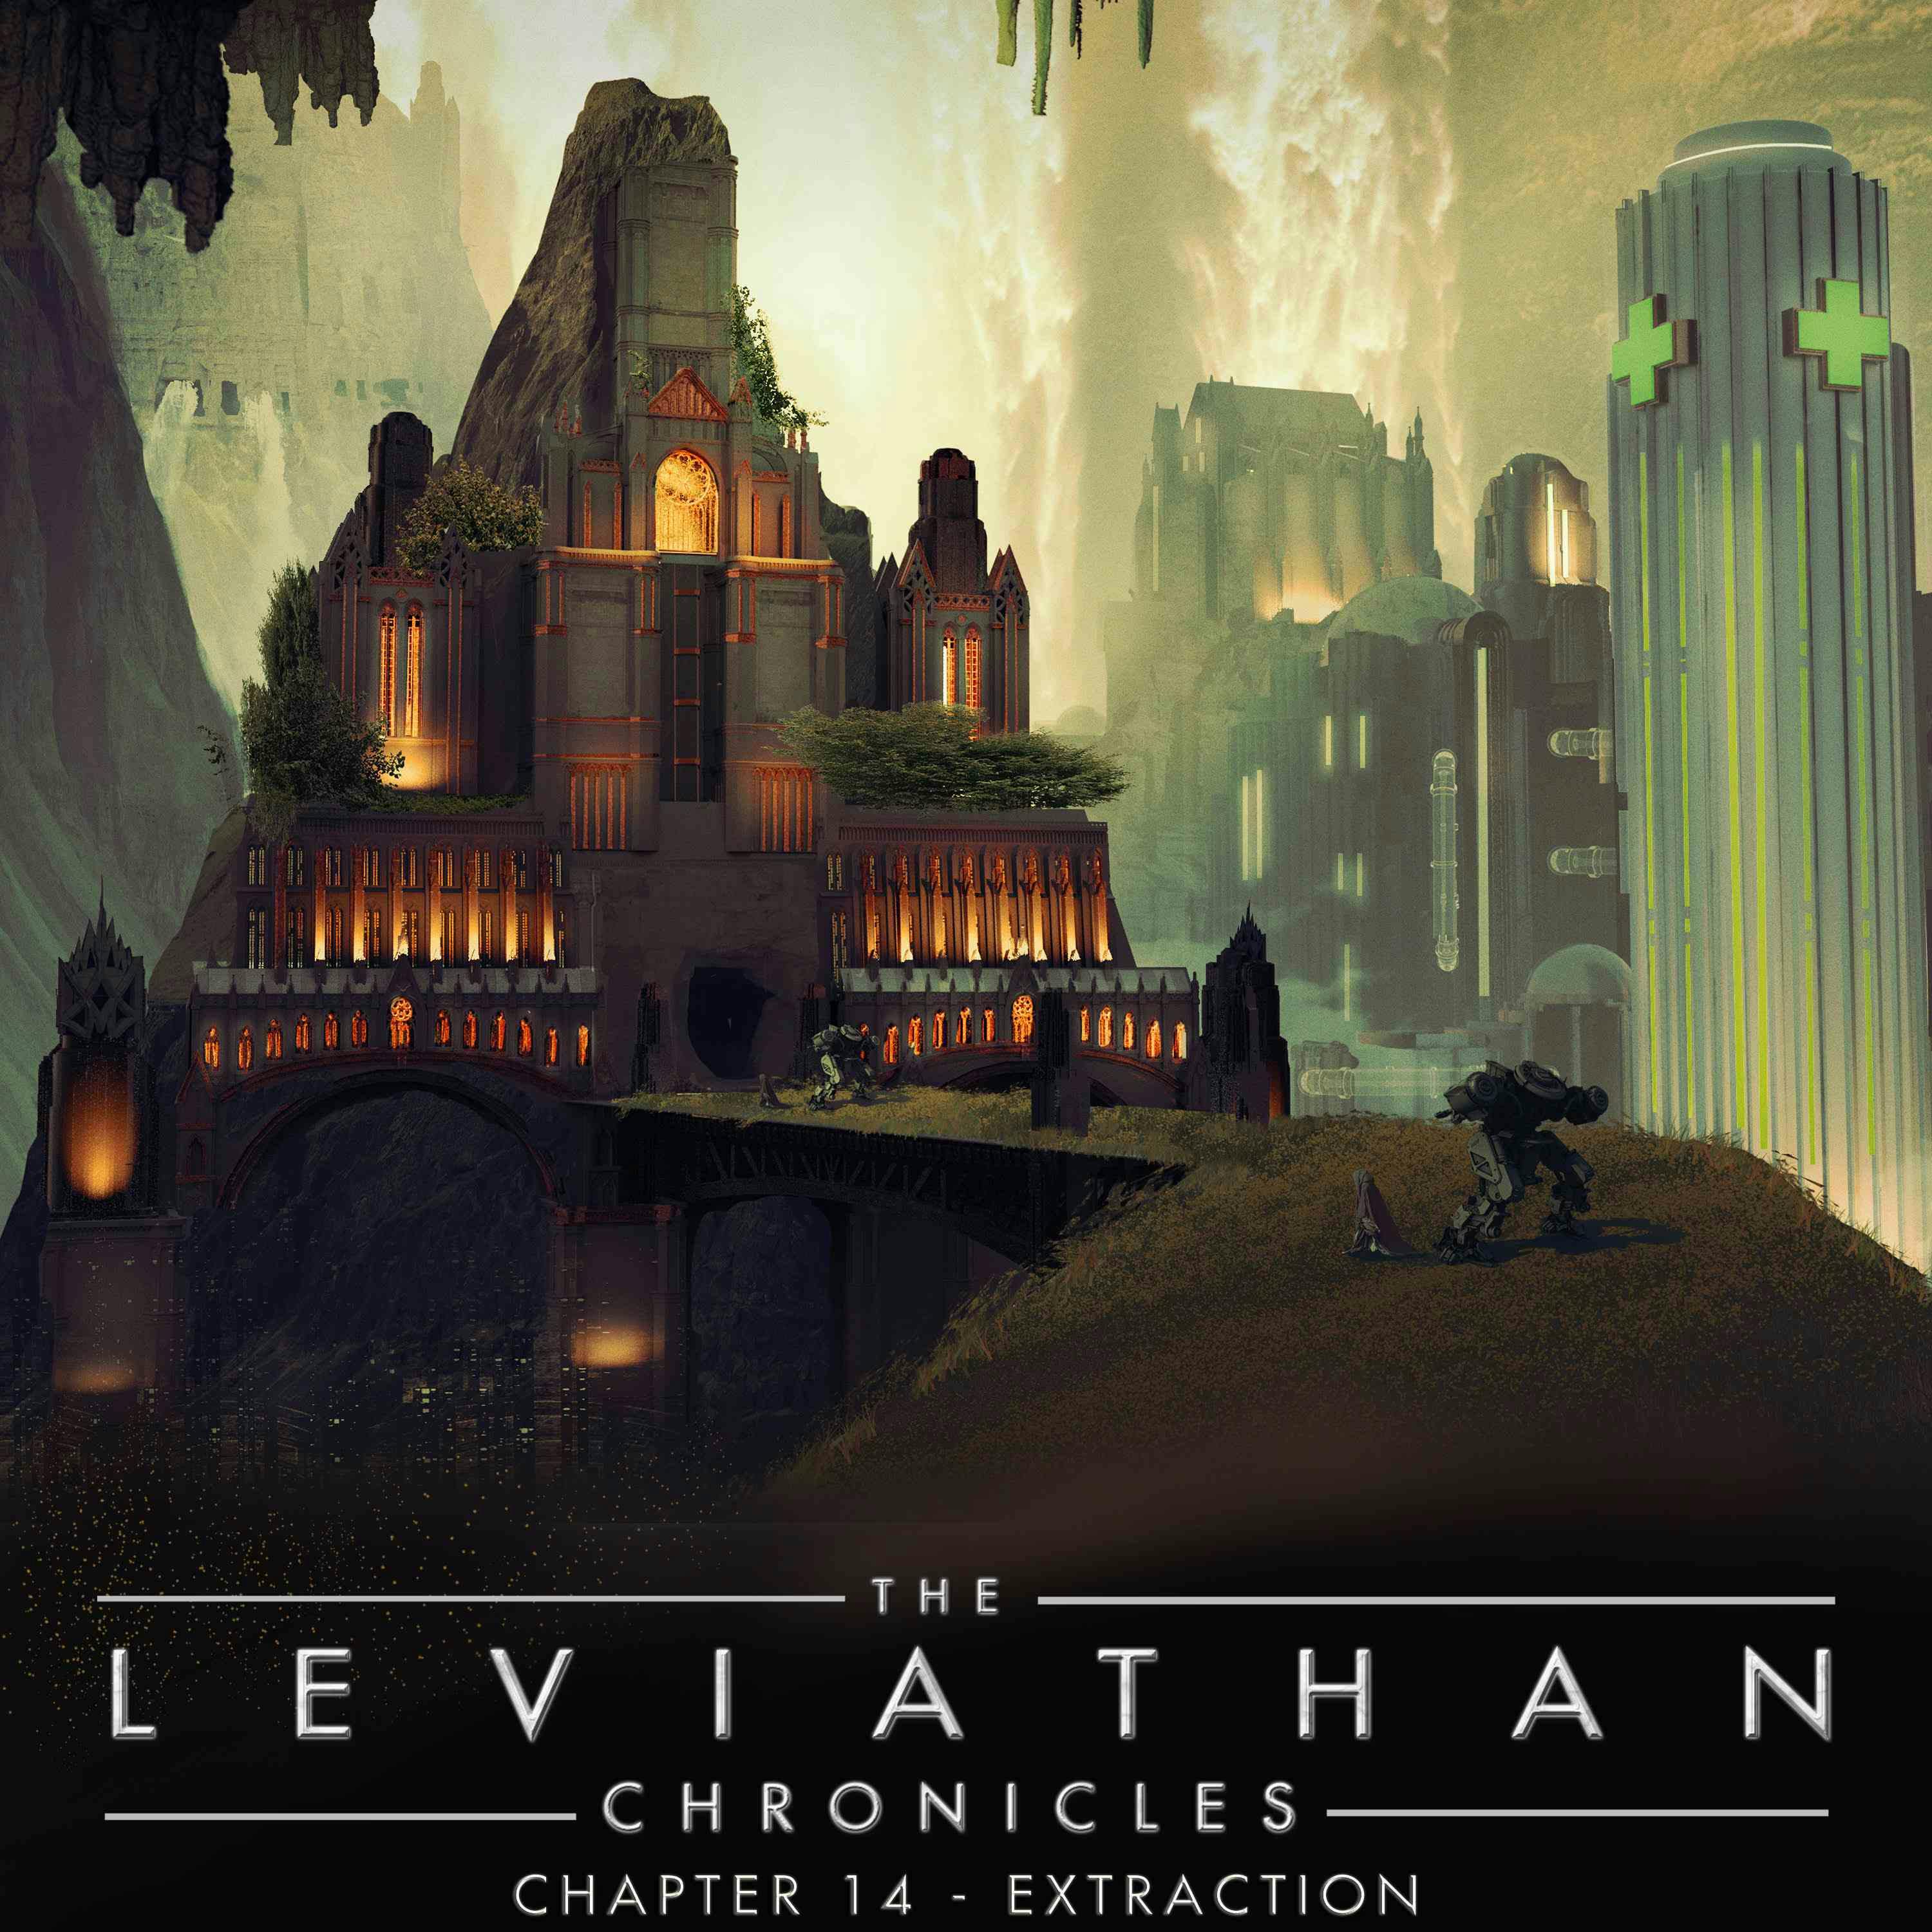 The Leviathan Chronicles | Chapter 14 - Extraction